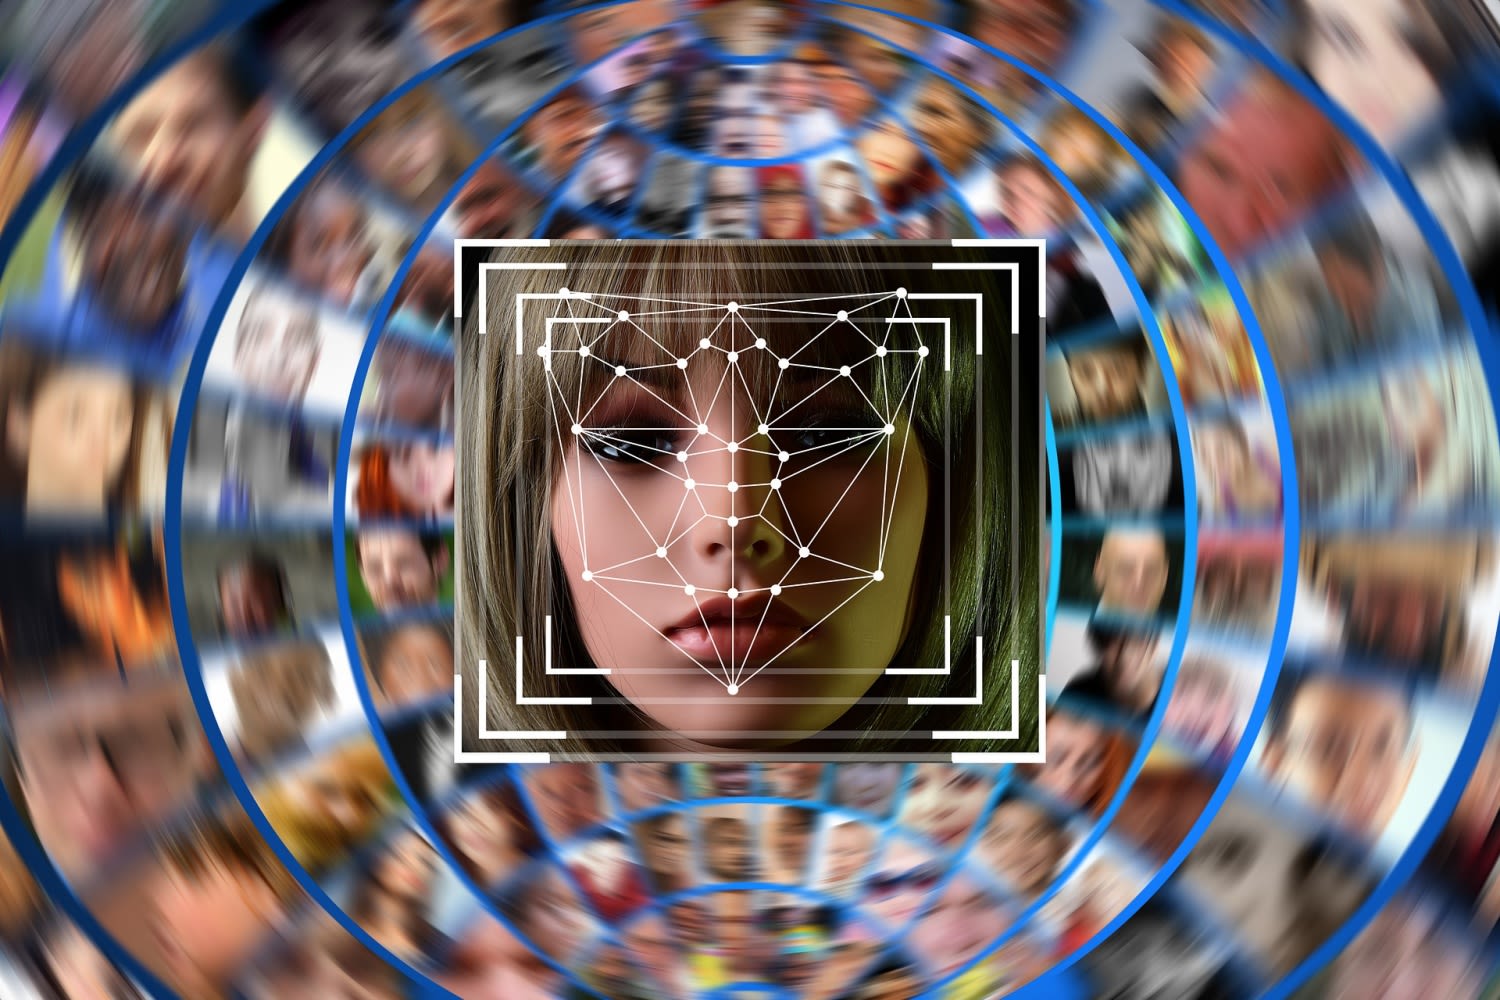 From Security to Privacy: Examining the Pros and Cons of Advancing Facial Recognition